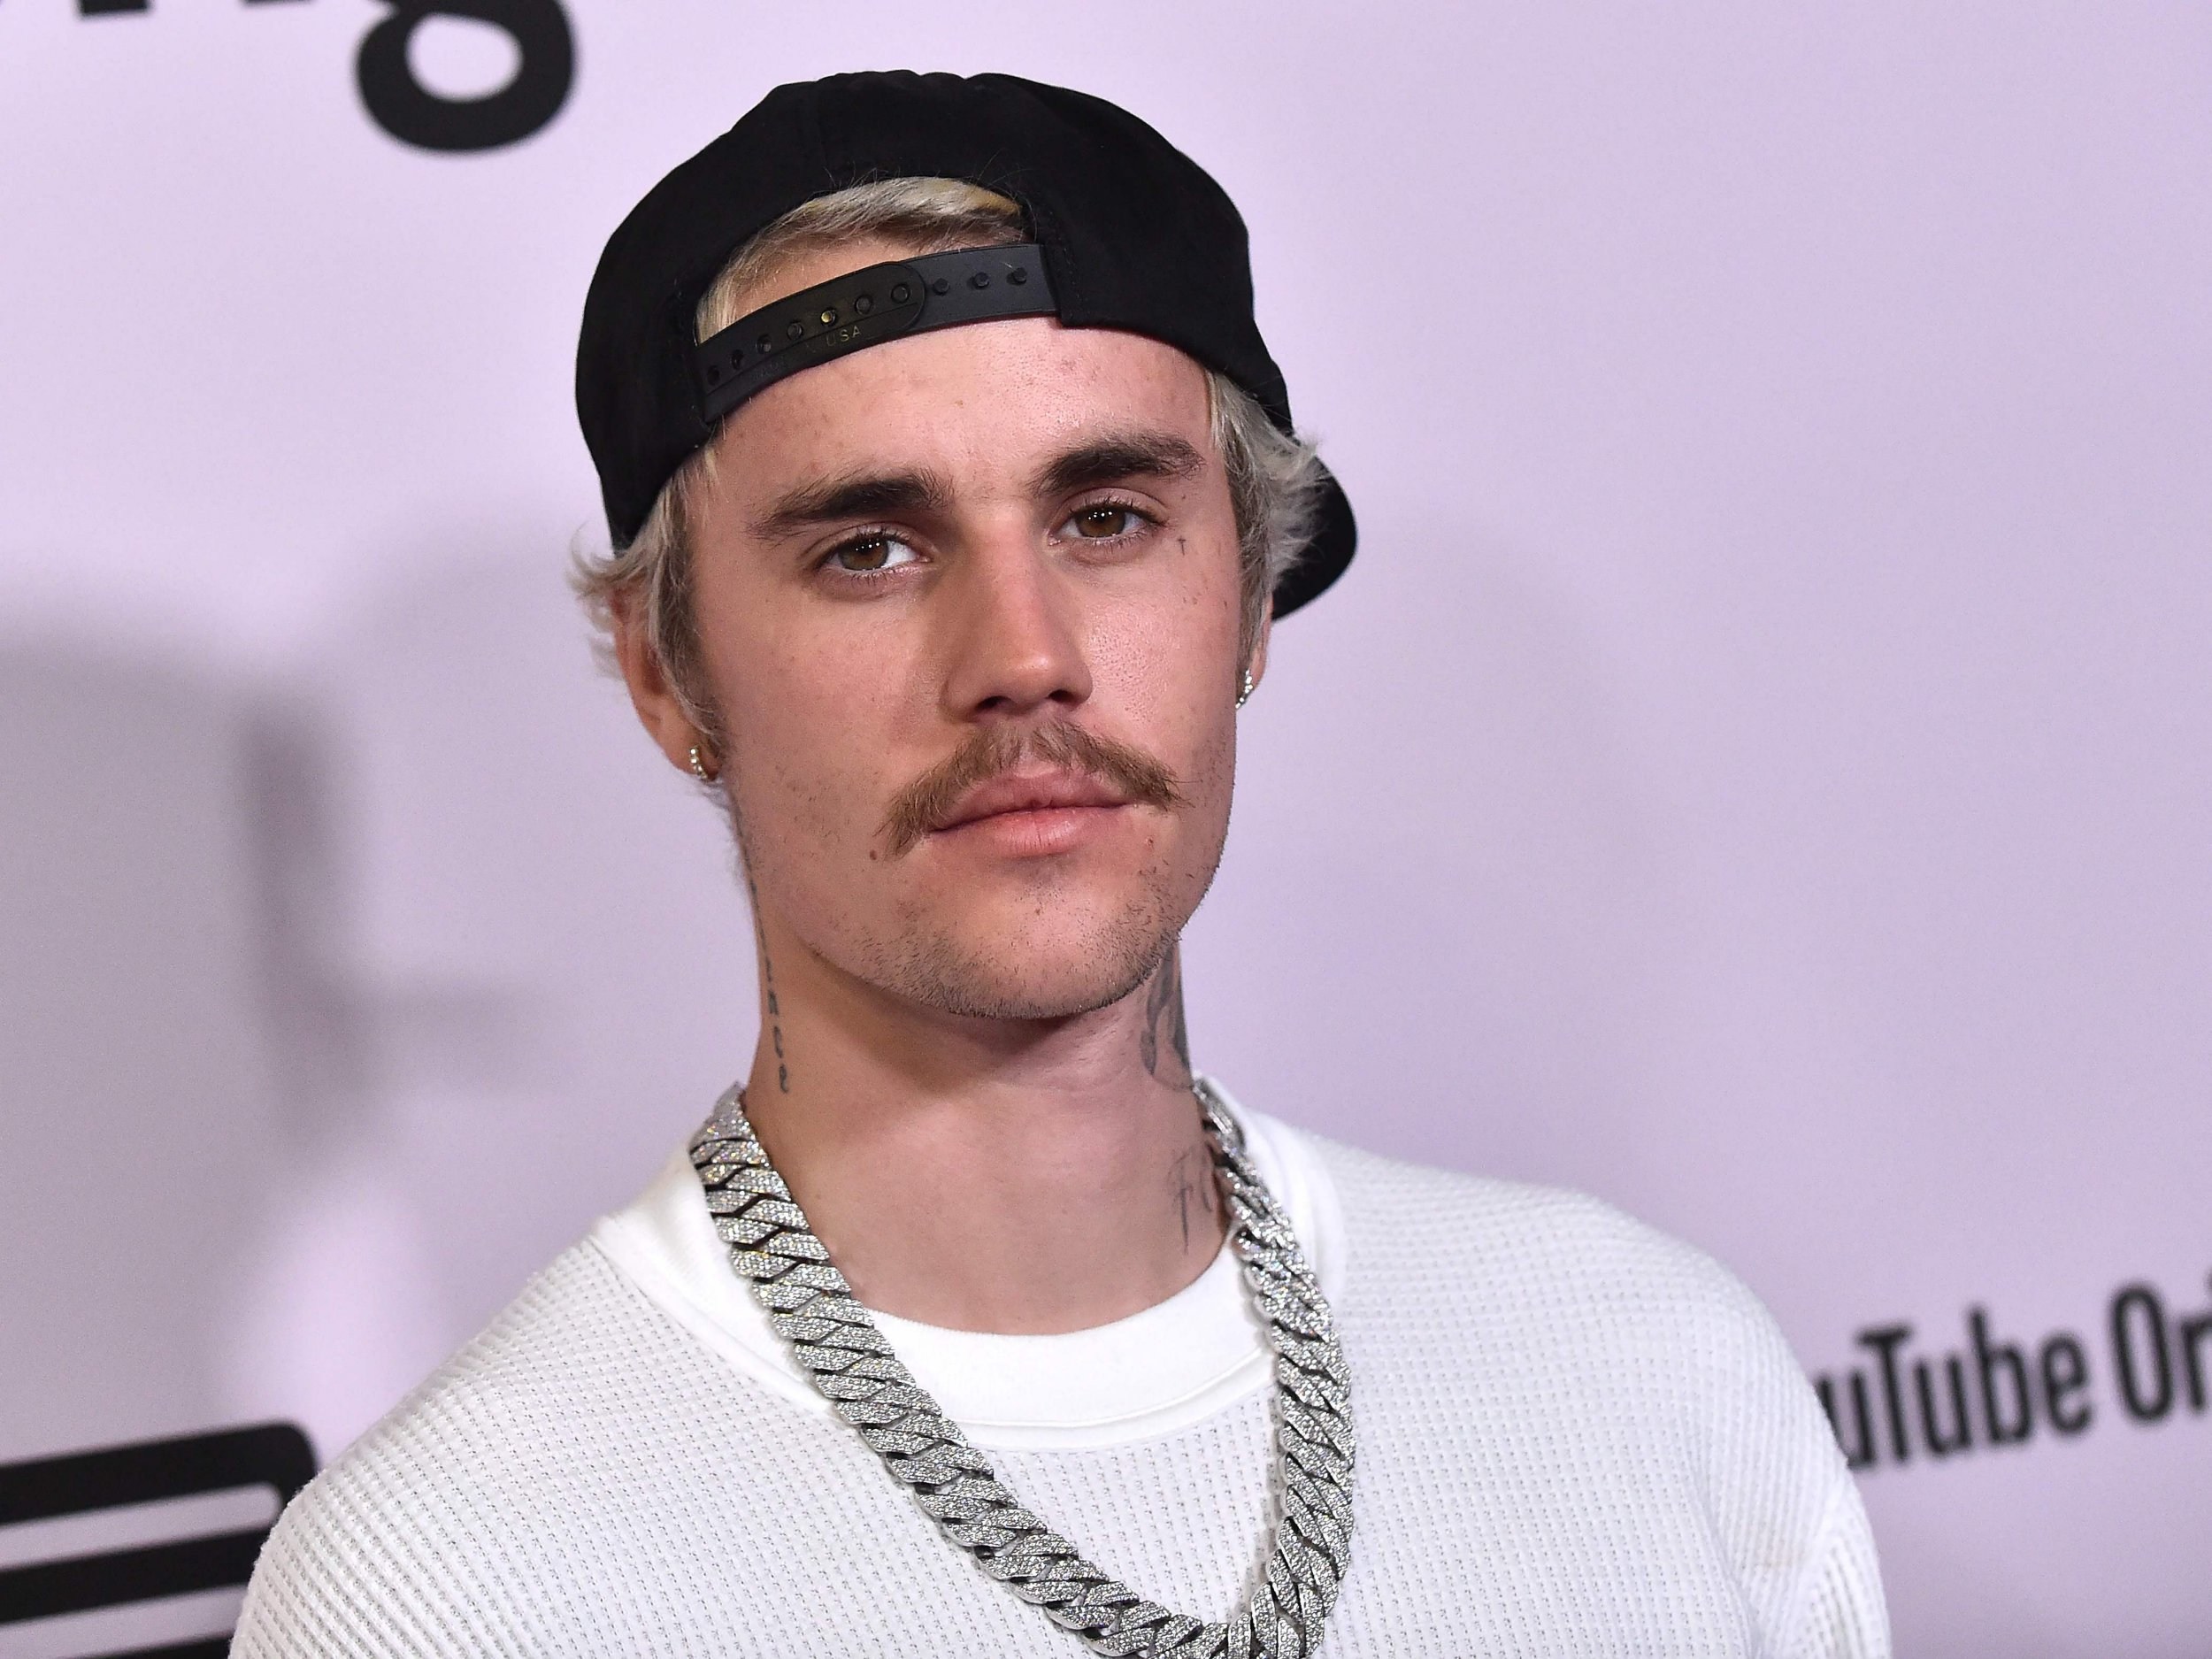 Canadian singer Justin Bieber arrives for YouTube Originals' "Justin Bieber: Seasons" premiere at the Regency Bruin Theatre in Los Angeles on January 27, 2020. (Photo by LISA O'CONNOR / AFP) (Photo by LISA O'CONNOR/AFP via Getty Images)